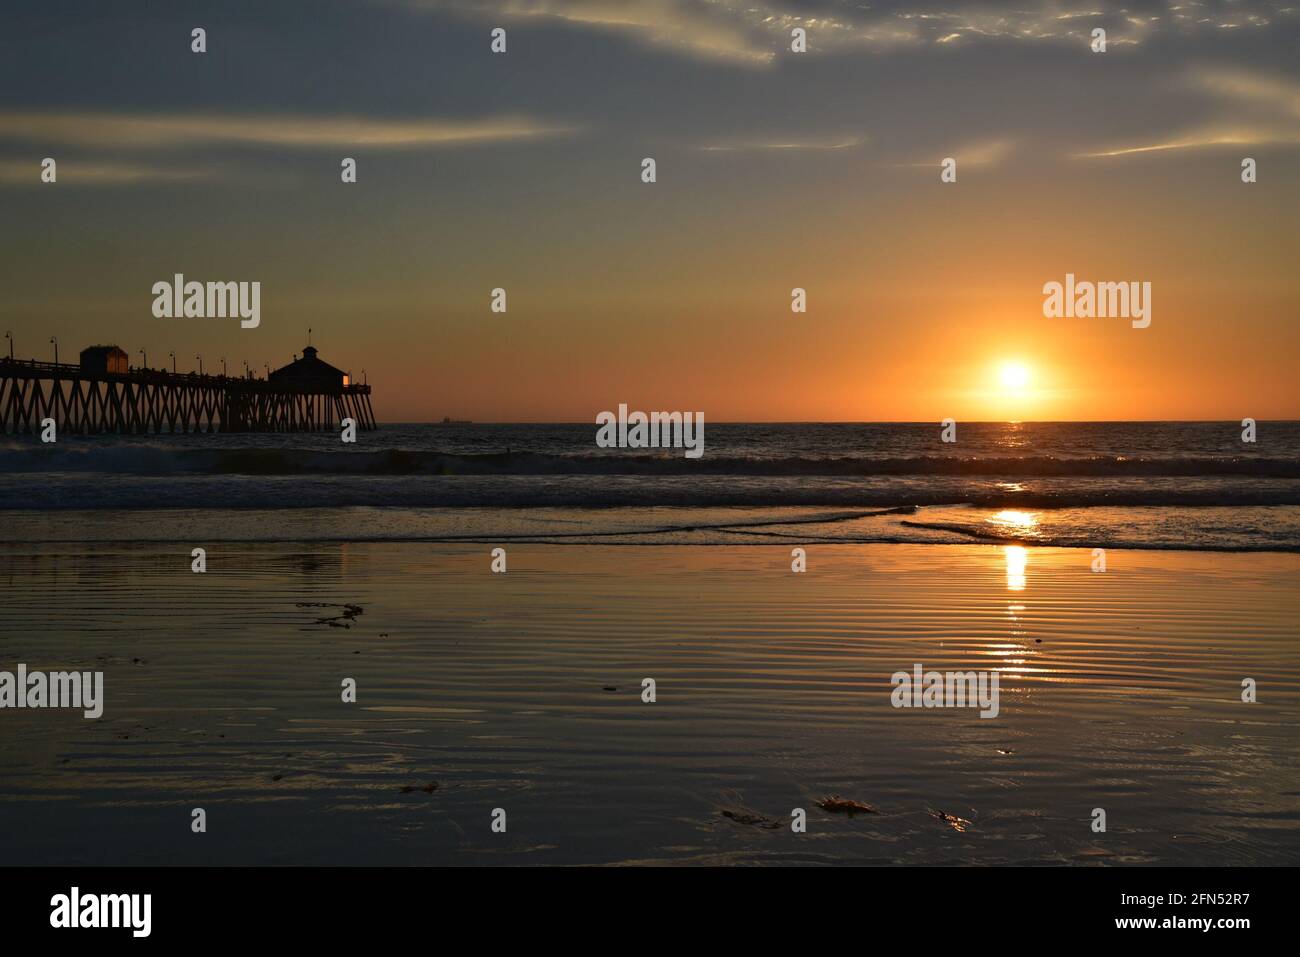 Sunset seascape with panoramic view of Imperial Beach Pier and the Tin Fish Restaurant in San Diego, California USA. Stock Photo